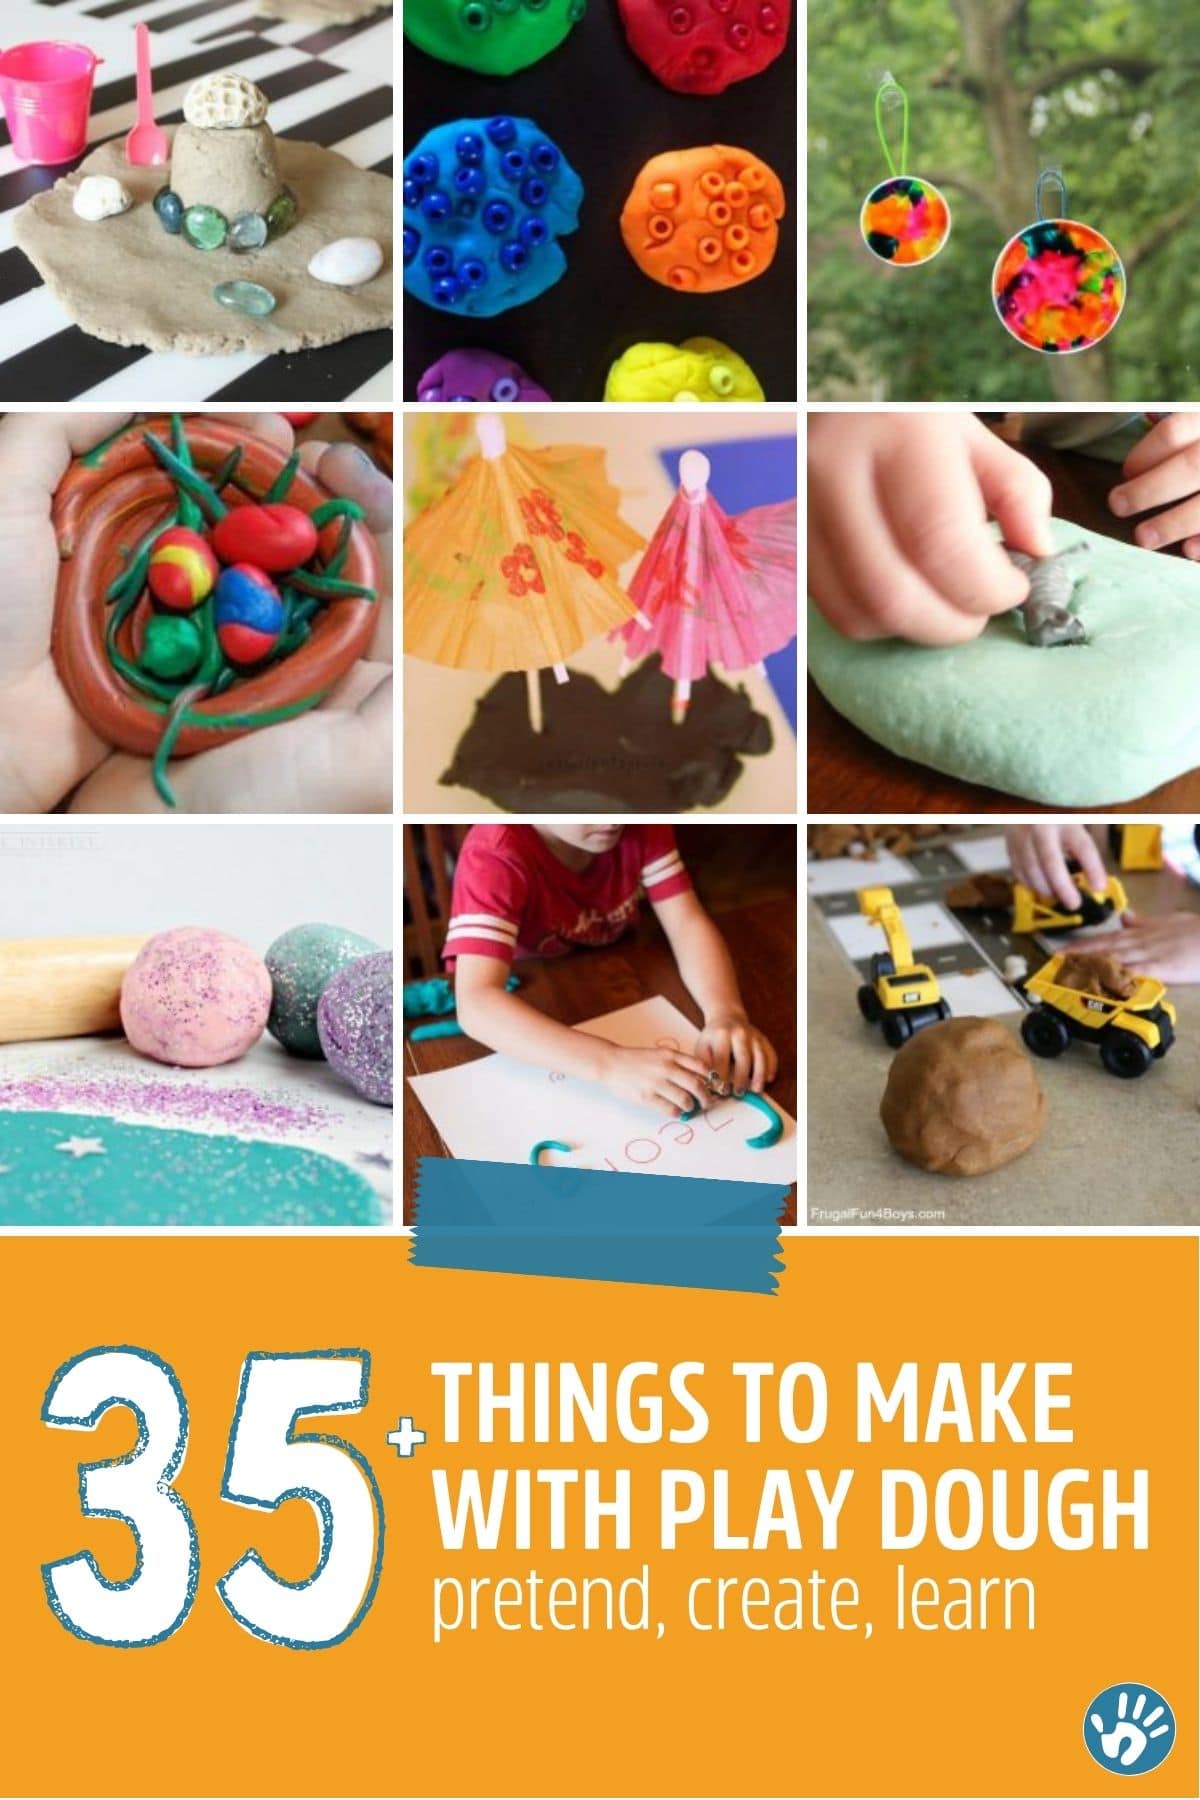 https://handsonaswegrow.com/wp-content/uploads/2022/07/35_things_to_make_with_play_dough_1200x1800_feature.jpg